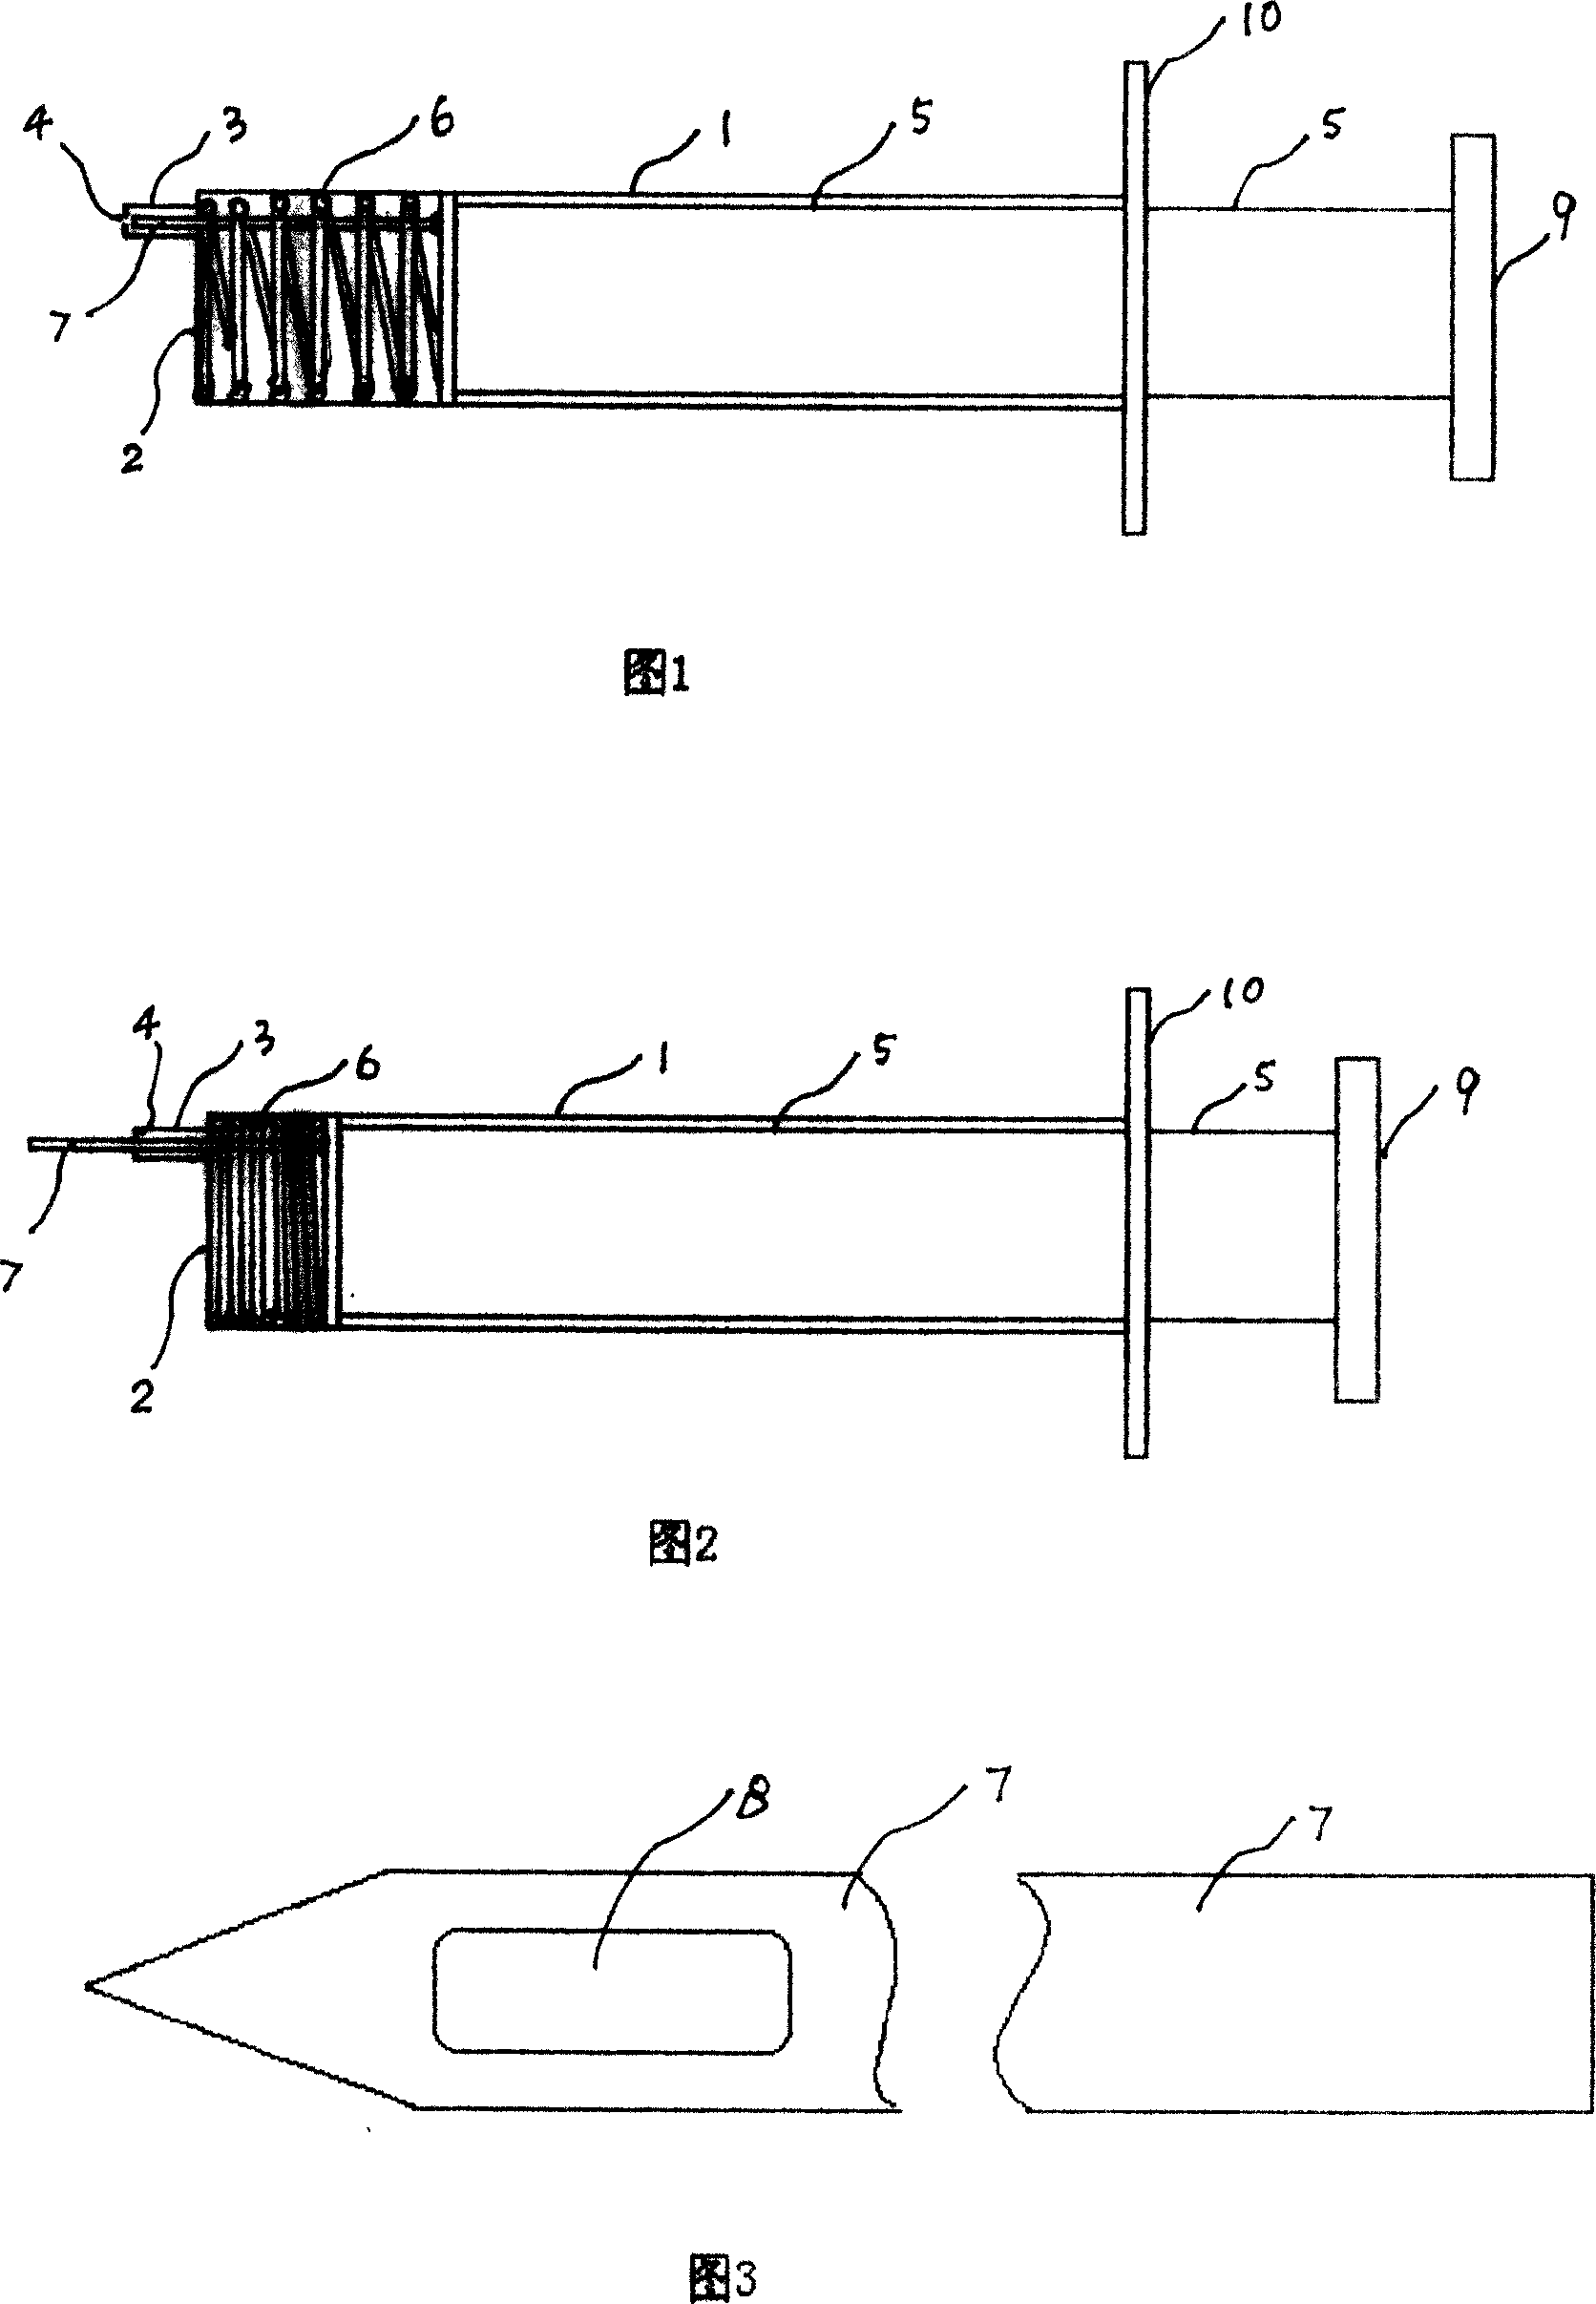 Pollination device for orchid